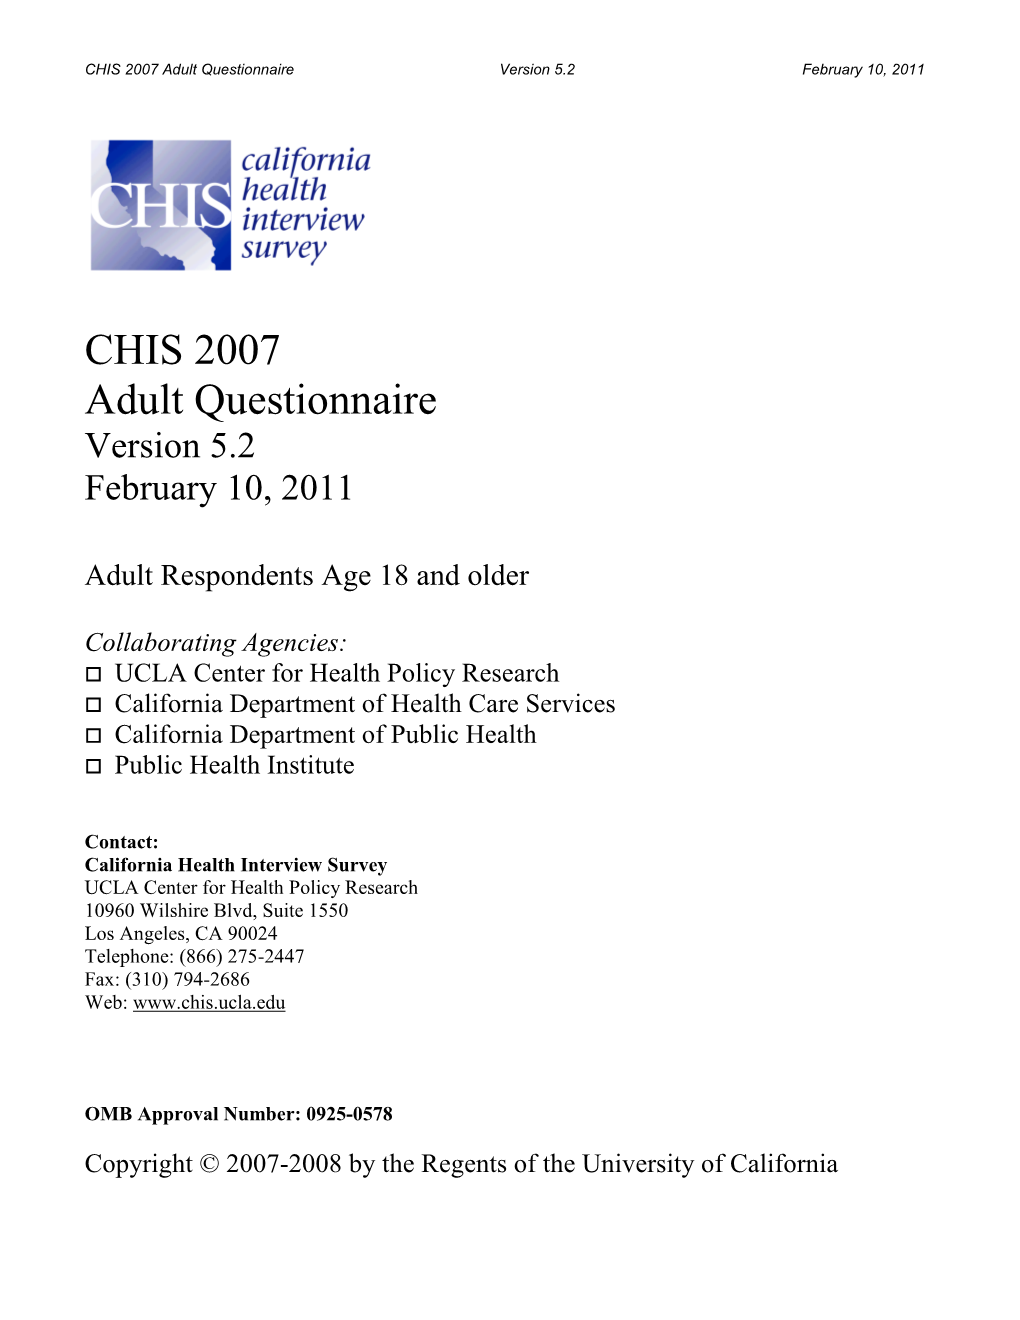 CHIS 2007 Adult Questionnaire Version 5.2 February 10, 2011